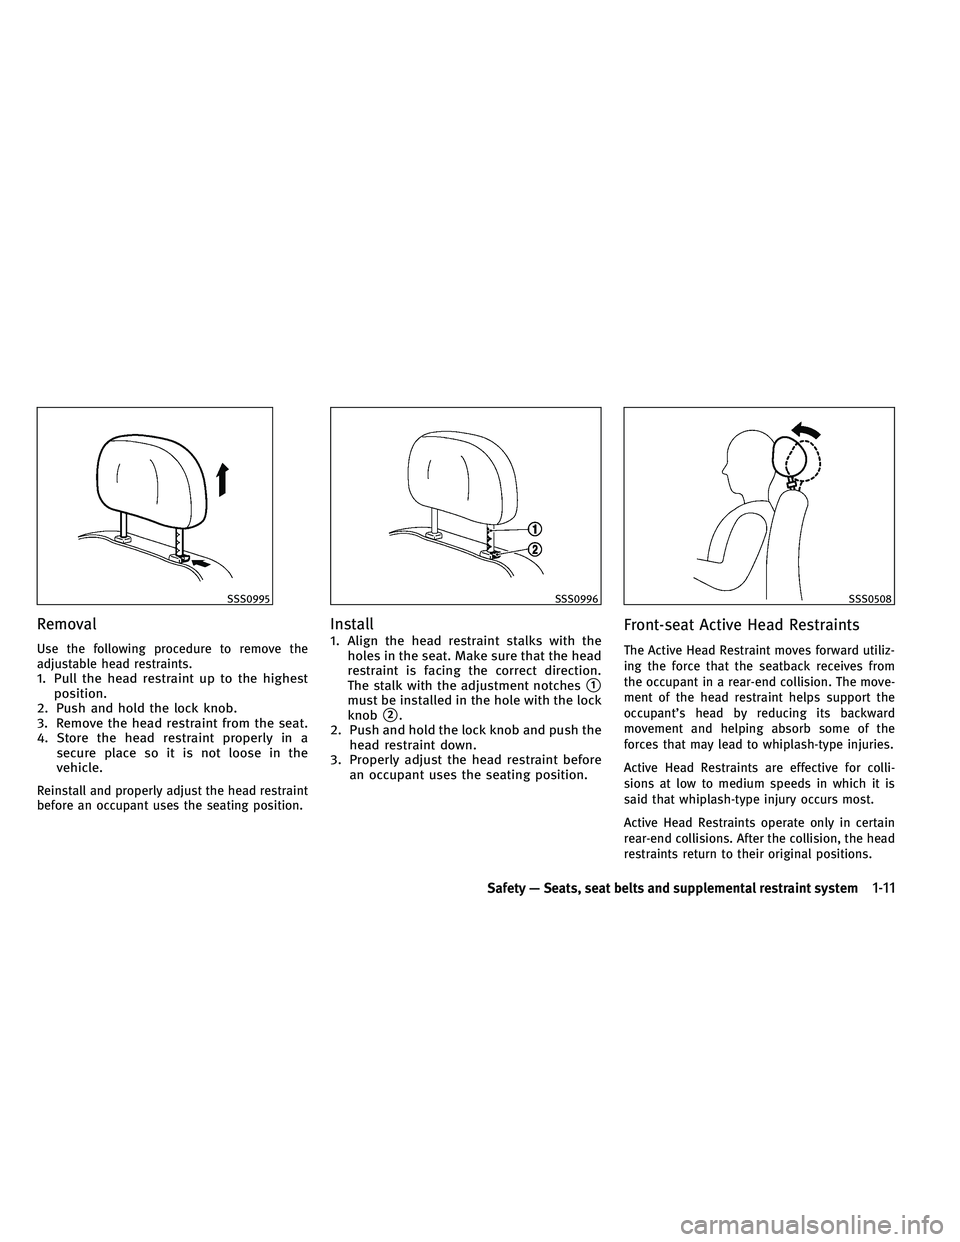 INFINITI G-COUPE 2011 Owners Guide Removal
Use the following procedure to remove the
adjustable head restraints.
1. Pull the head restraint up to the highestposition.
2. Push and hold the lock knob.
3. Remove the head restraint from th